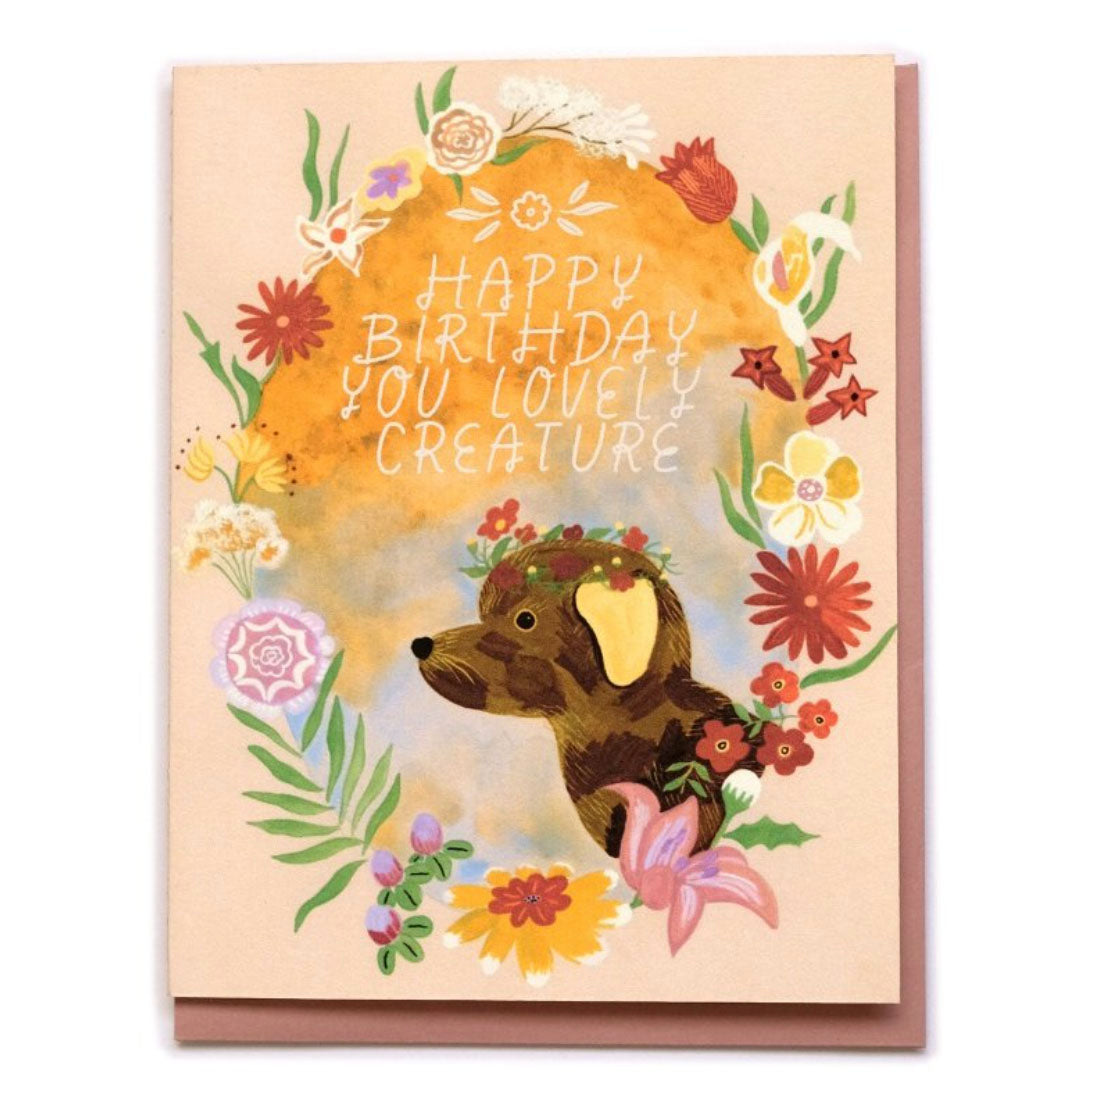 Small Adventure Lovely Creature Birthday Card | Prelude & Dawn | Los Angeles, CA